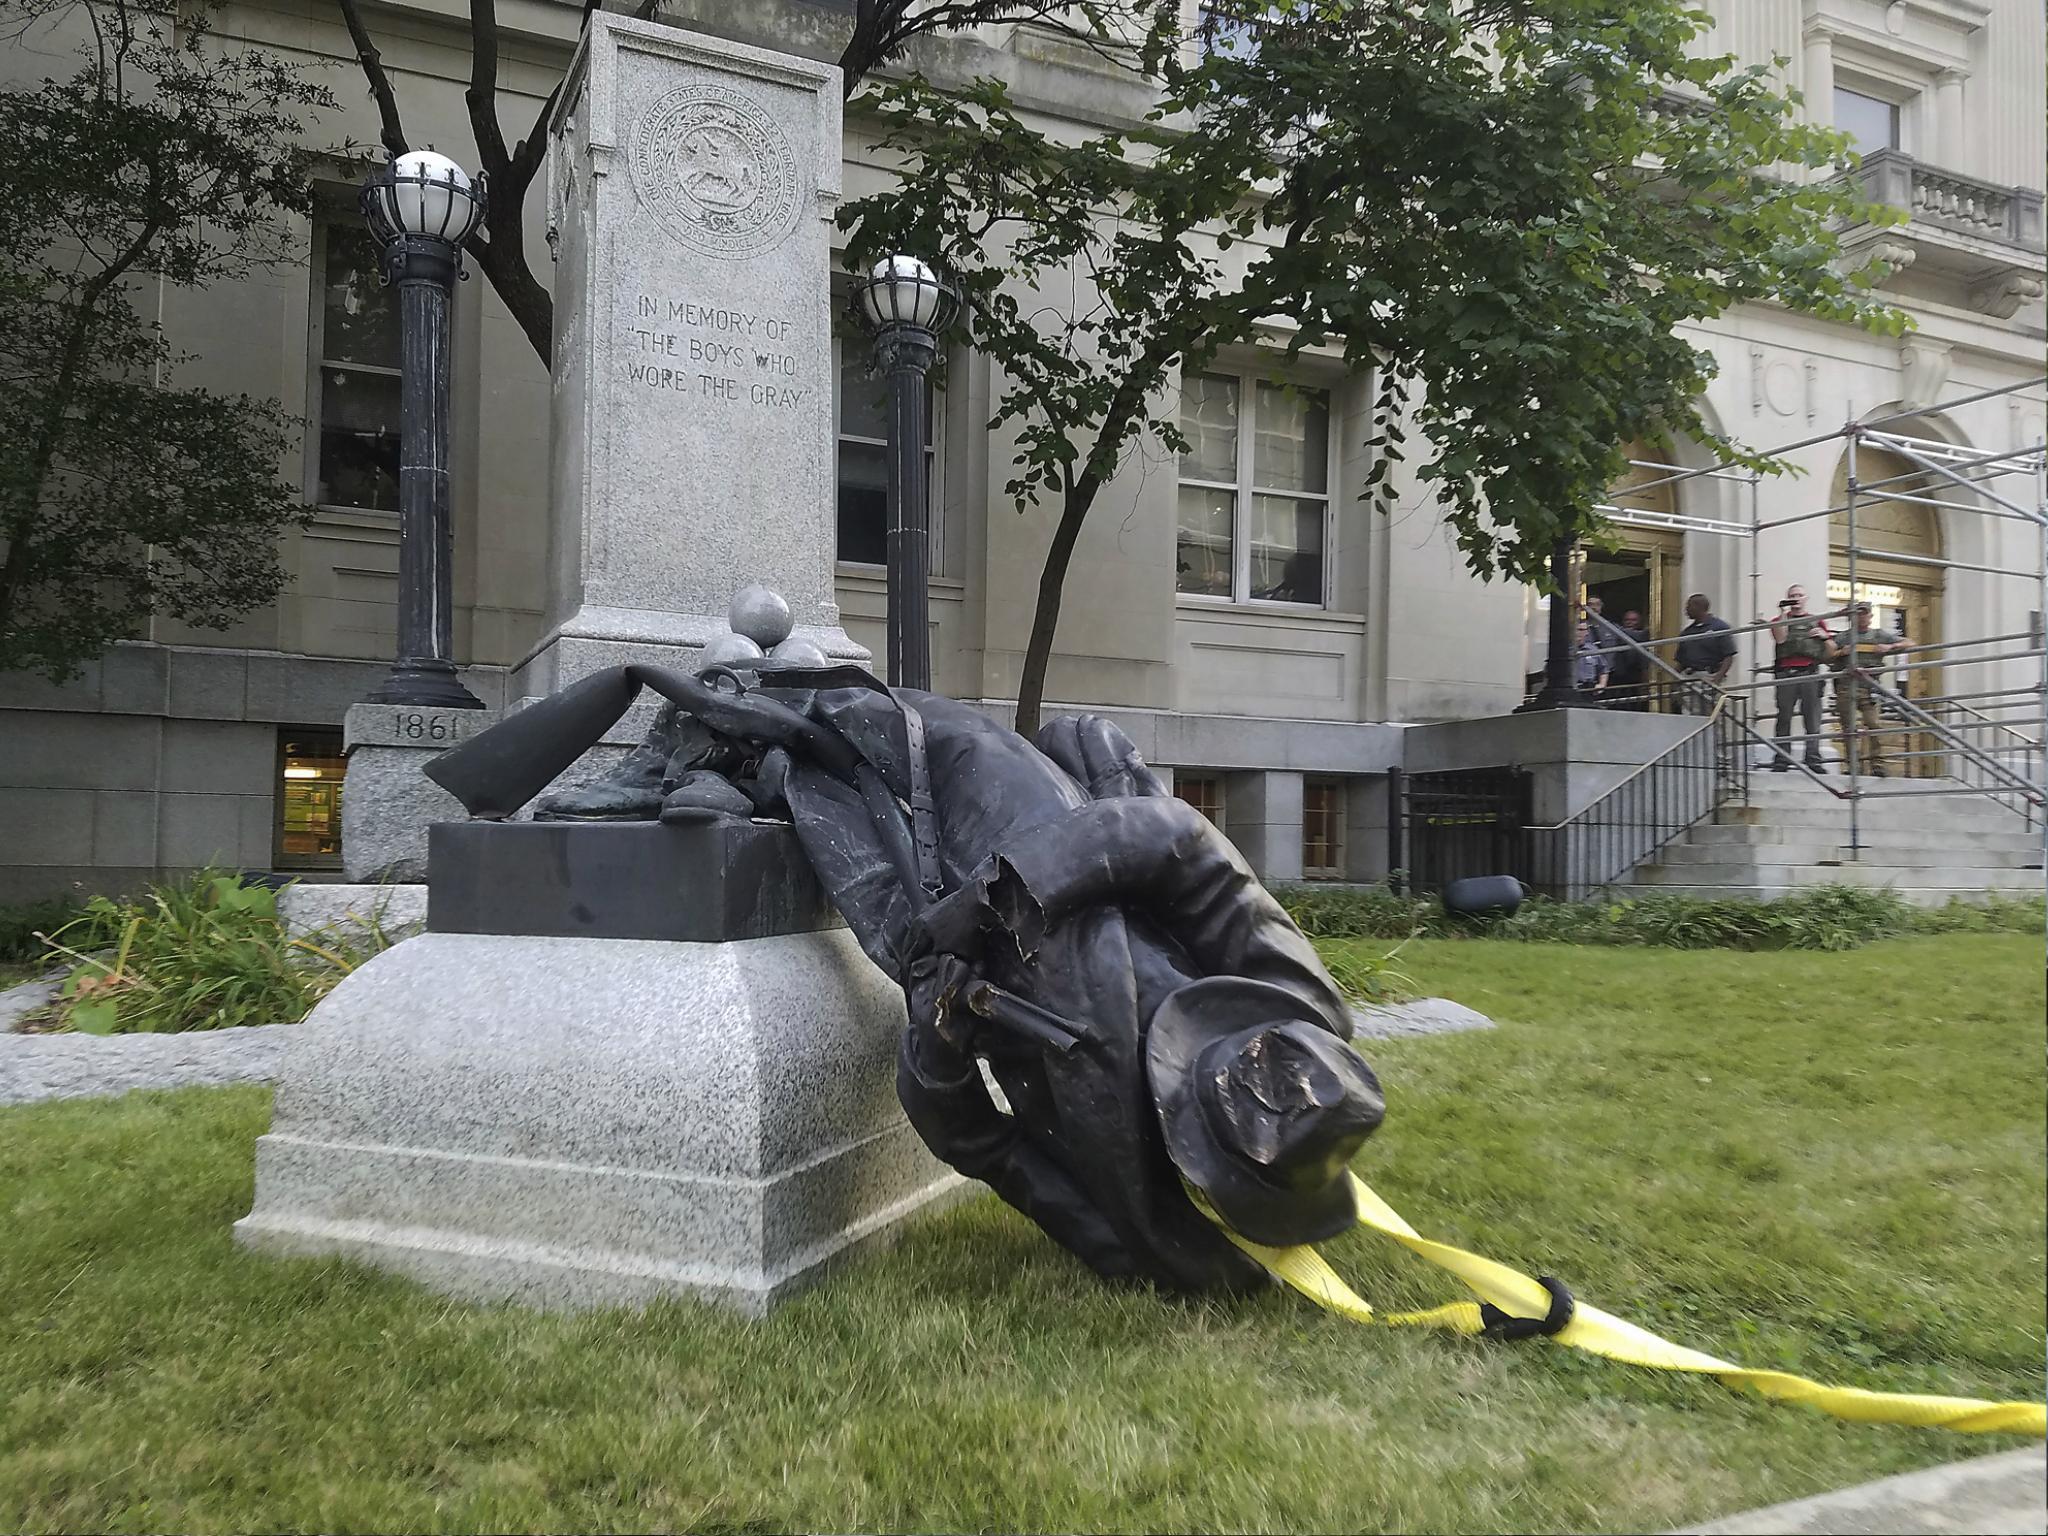 A toppled Confederate statue lies on the ground on 14 August 2017 in Durham, North Carolina where activists used a rope to pull it down after the violence in Charlottesville, Virginia